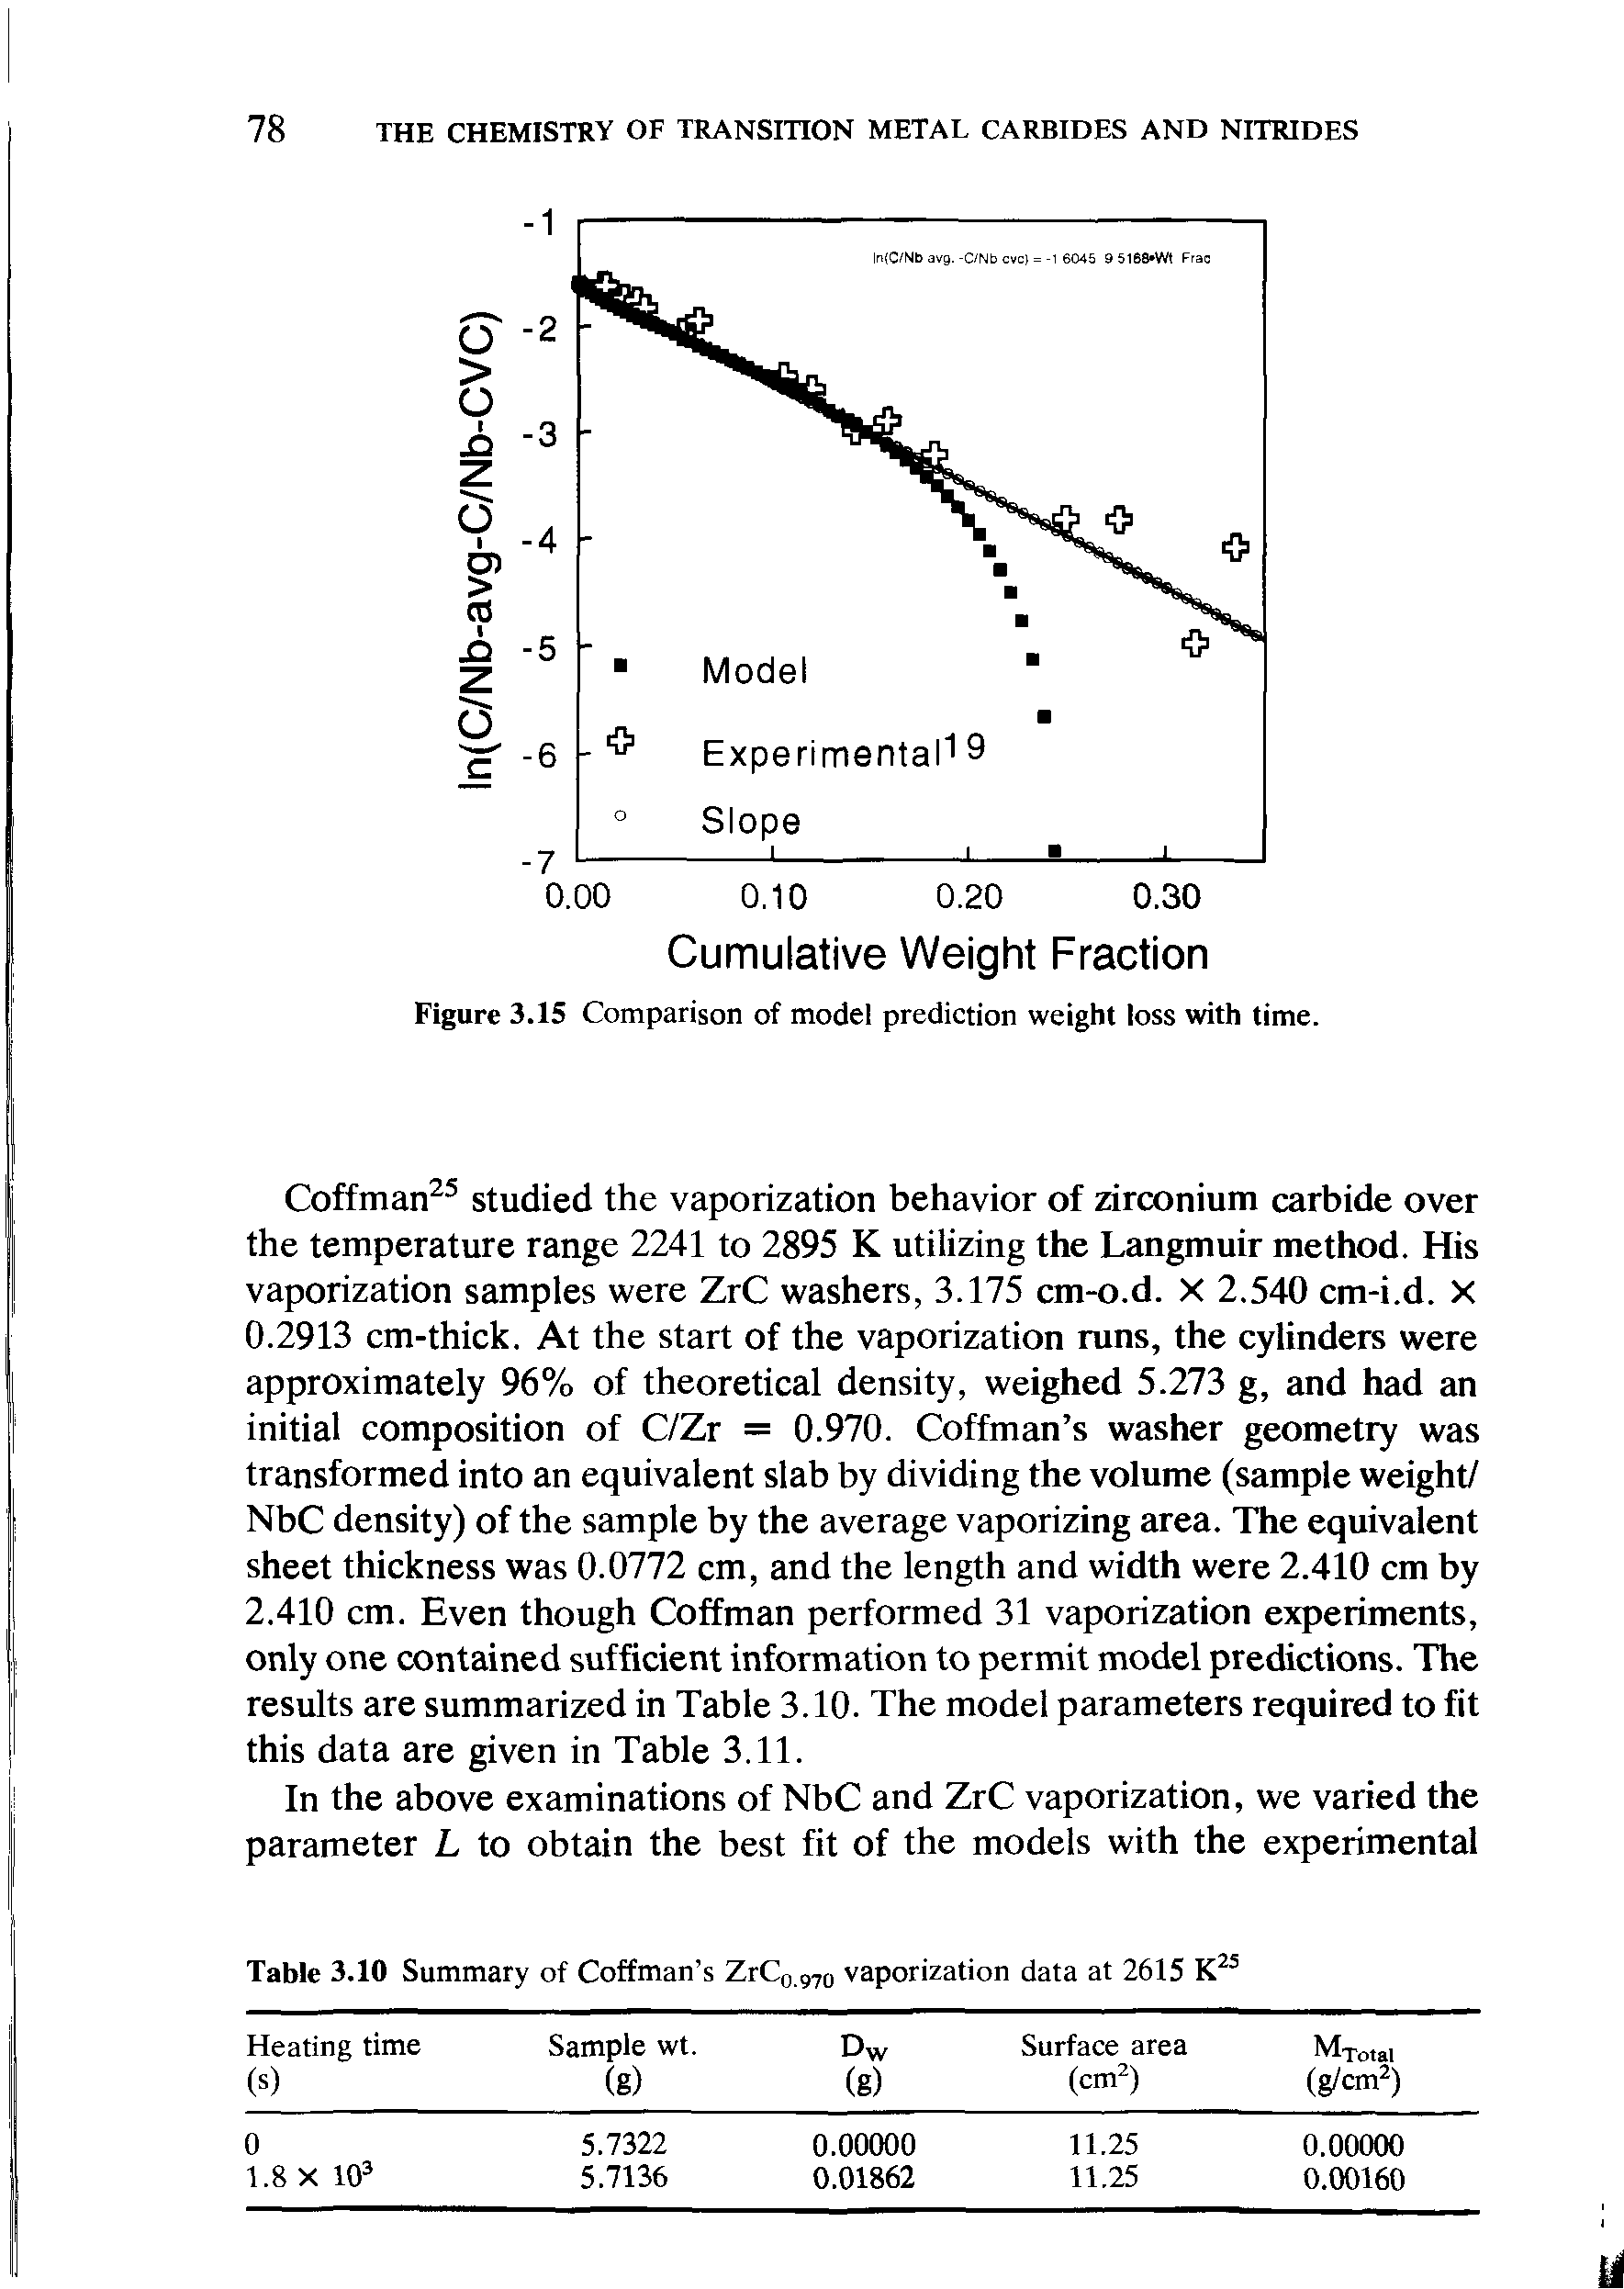 Figure 3.15 Comparison of model prediction weight loss with time.